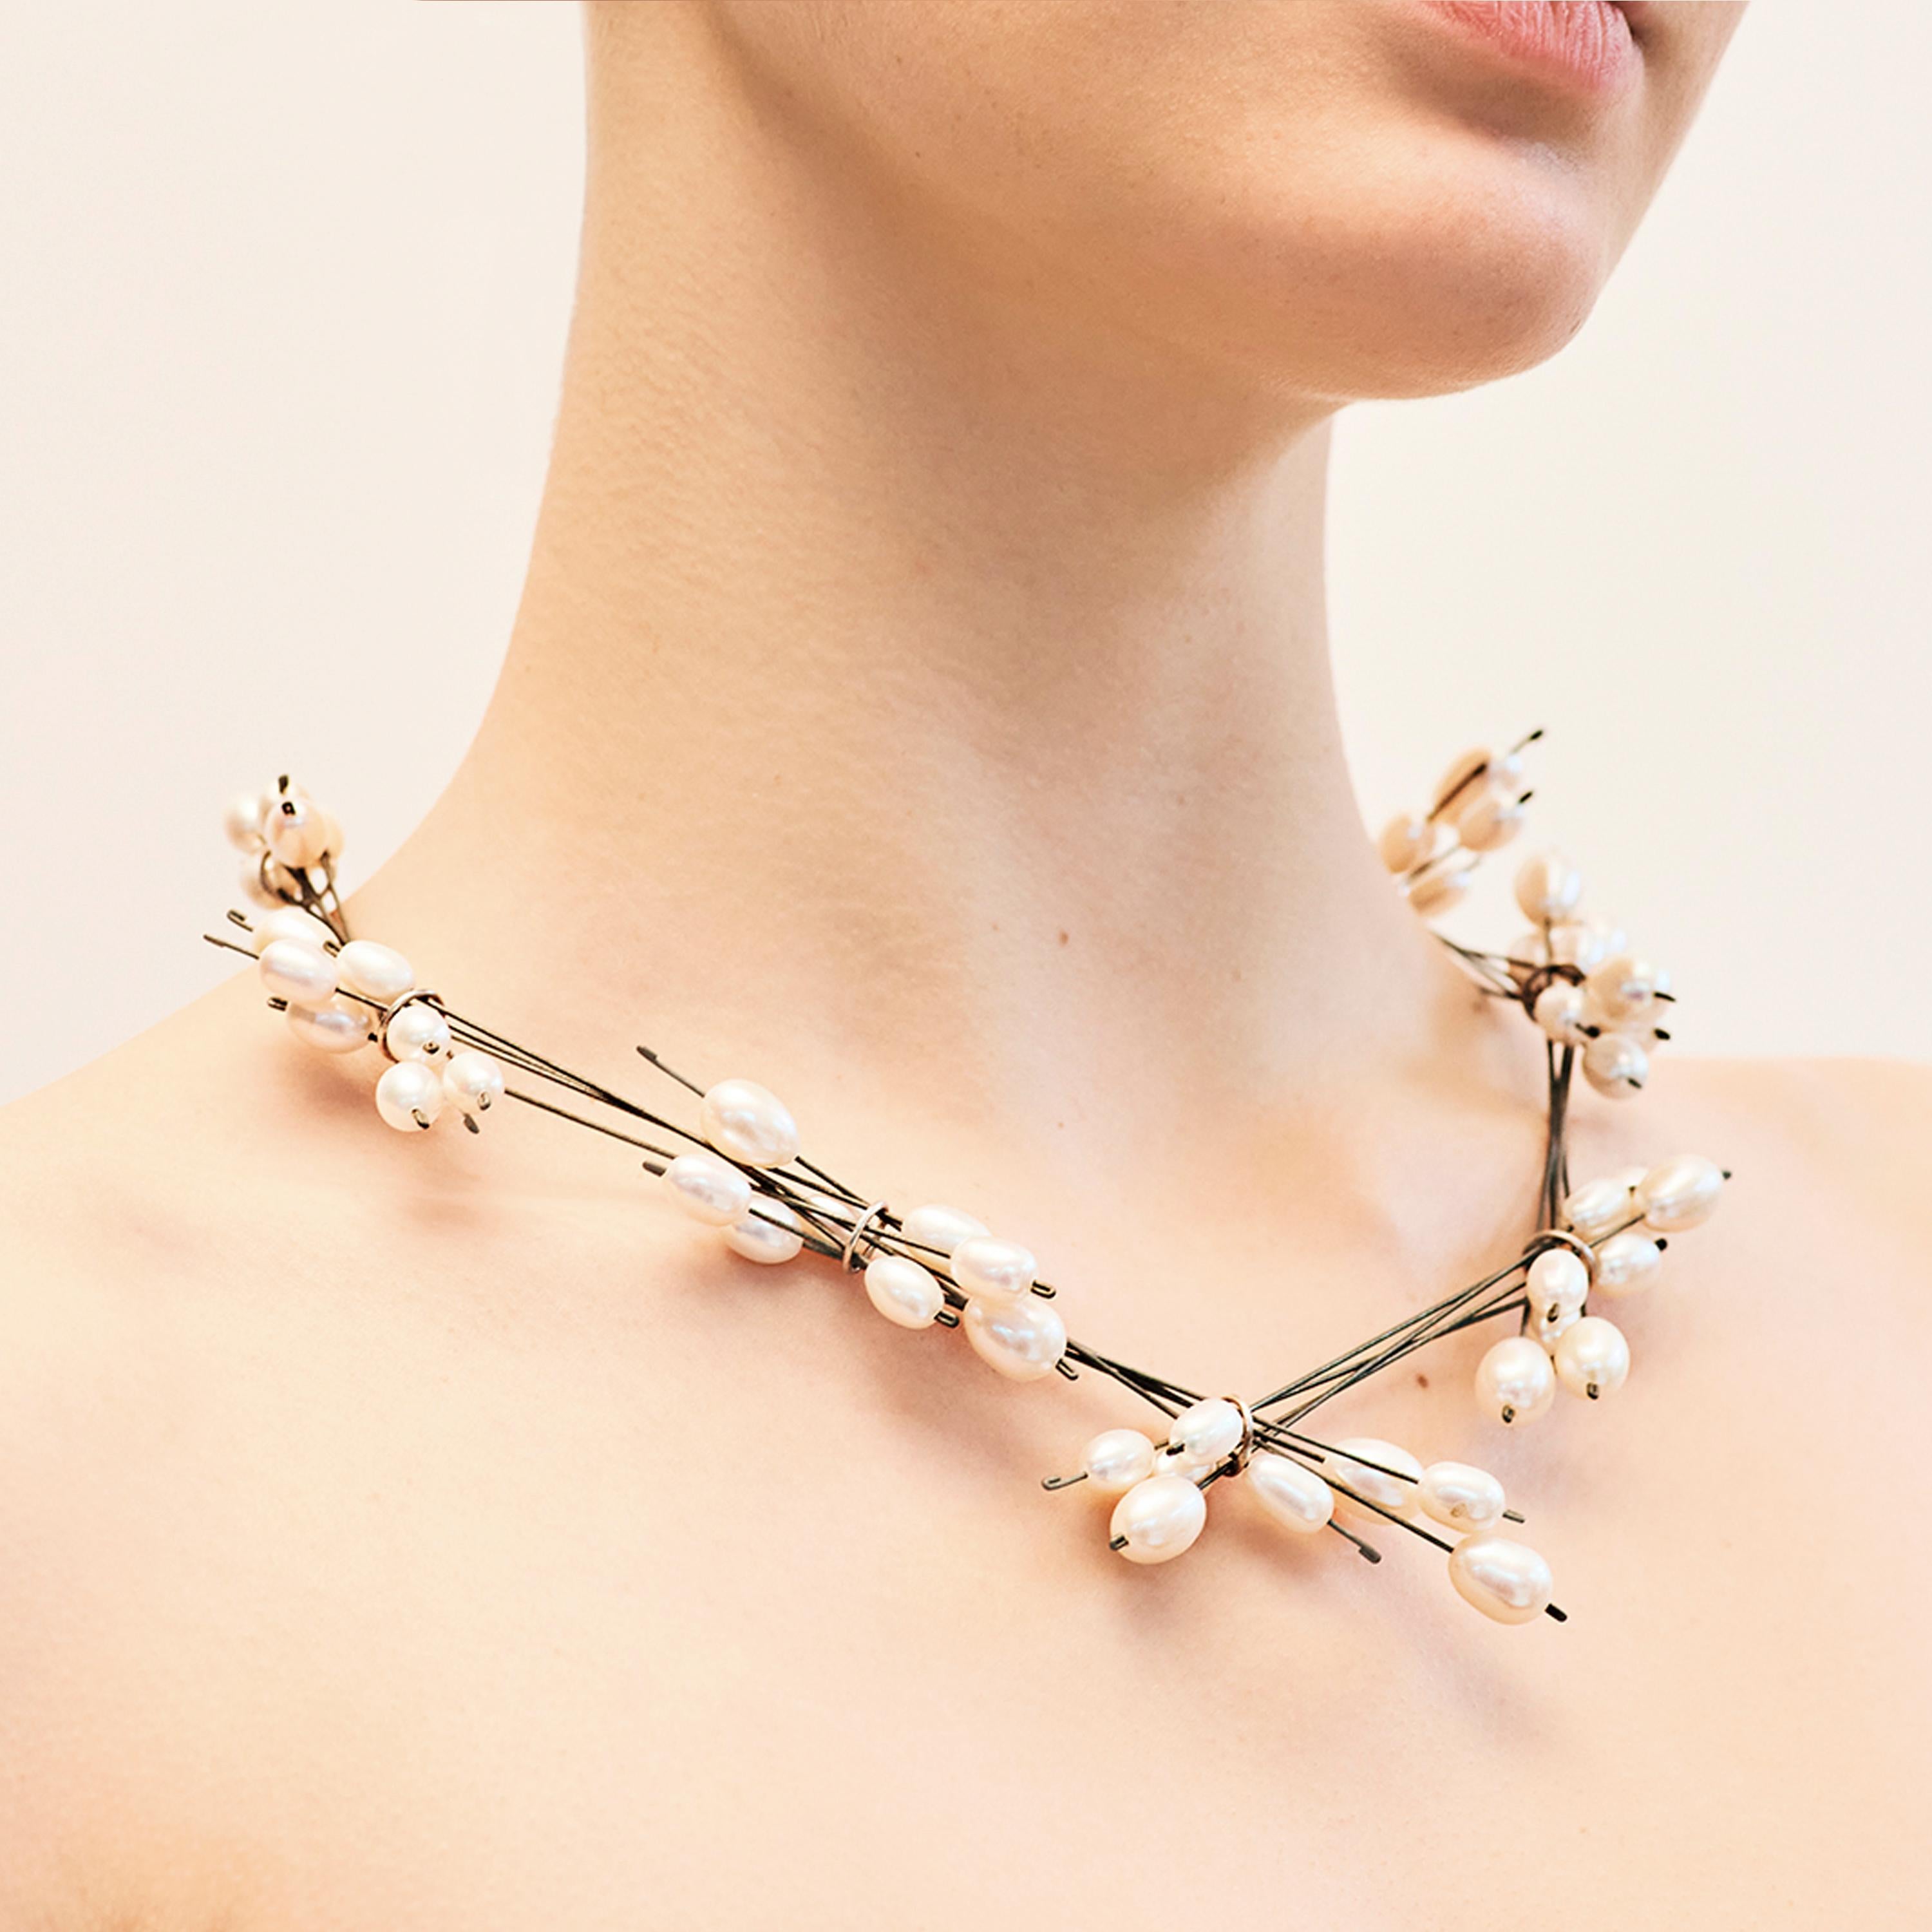 Ambroise Degenève’s Roseaux Necklace belongs to the designer’s ‘Wire’ collection. Freshwater pearls are beautifully presented on fine titanium wires. The wires are arranged in small bunches and held together by rings of silver 925, conveying a